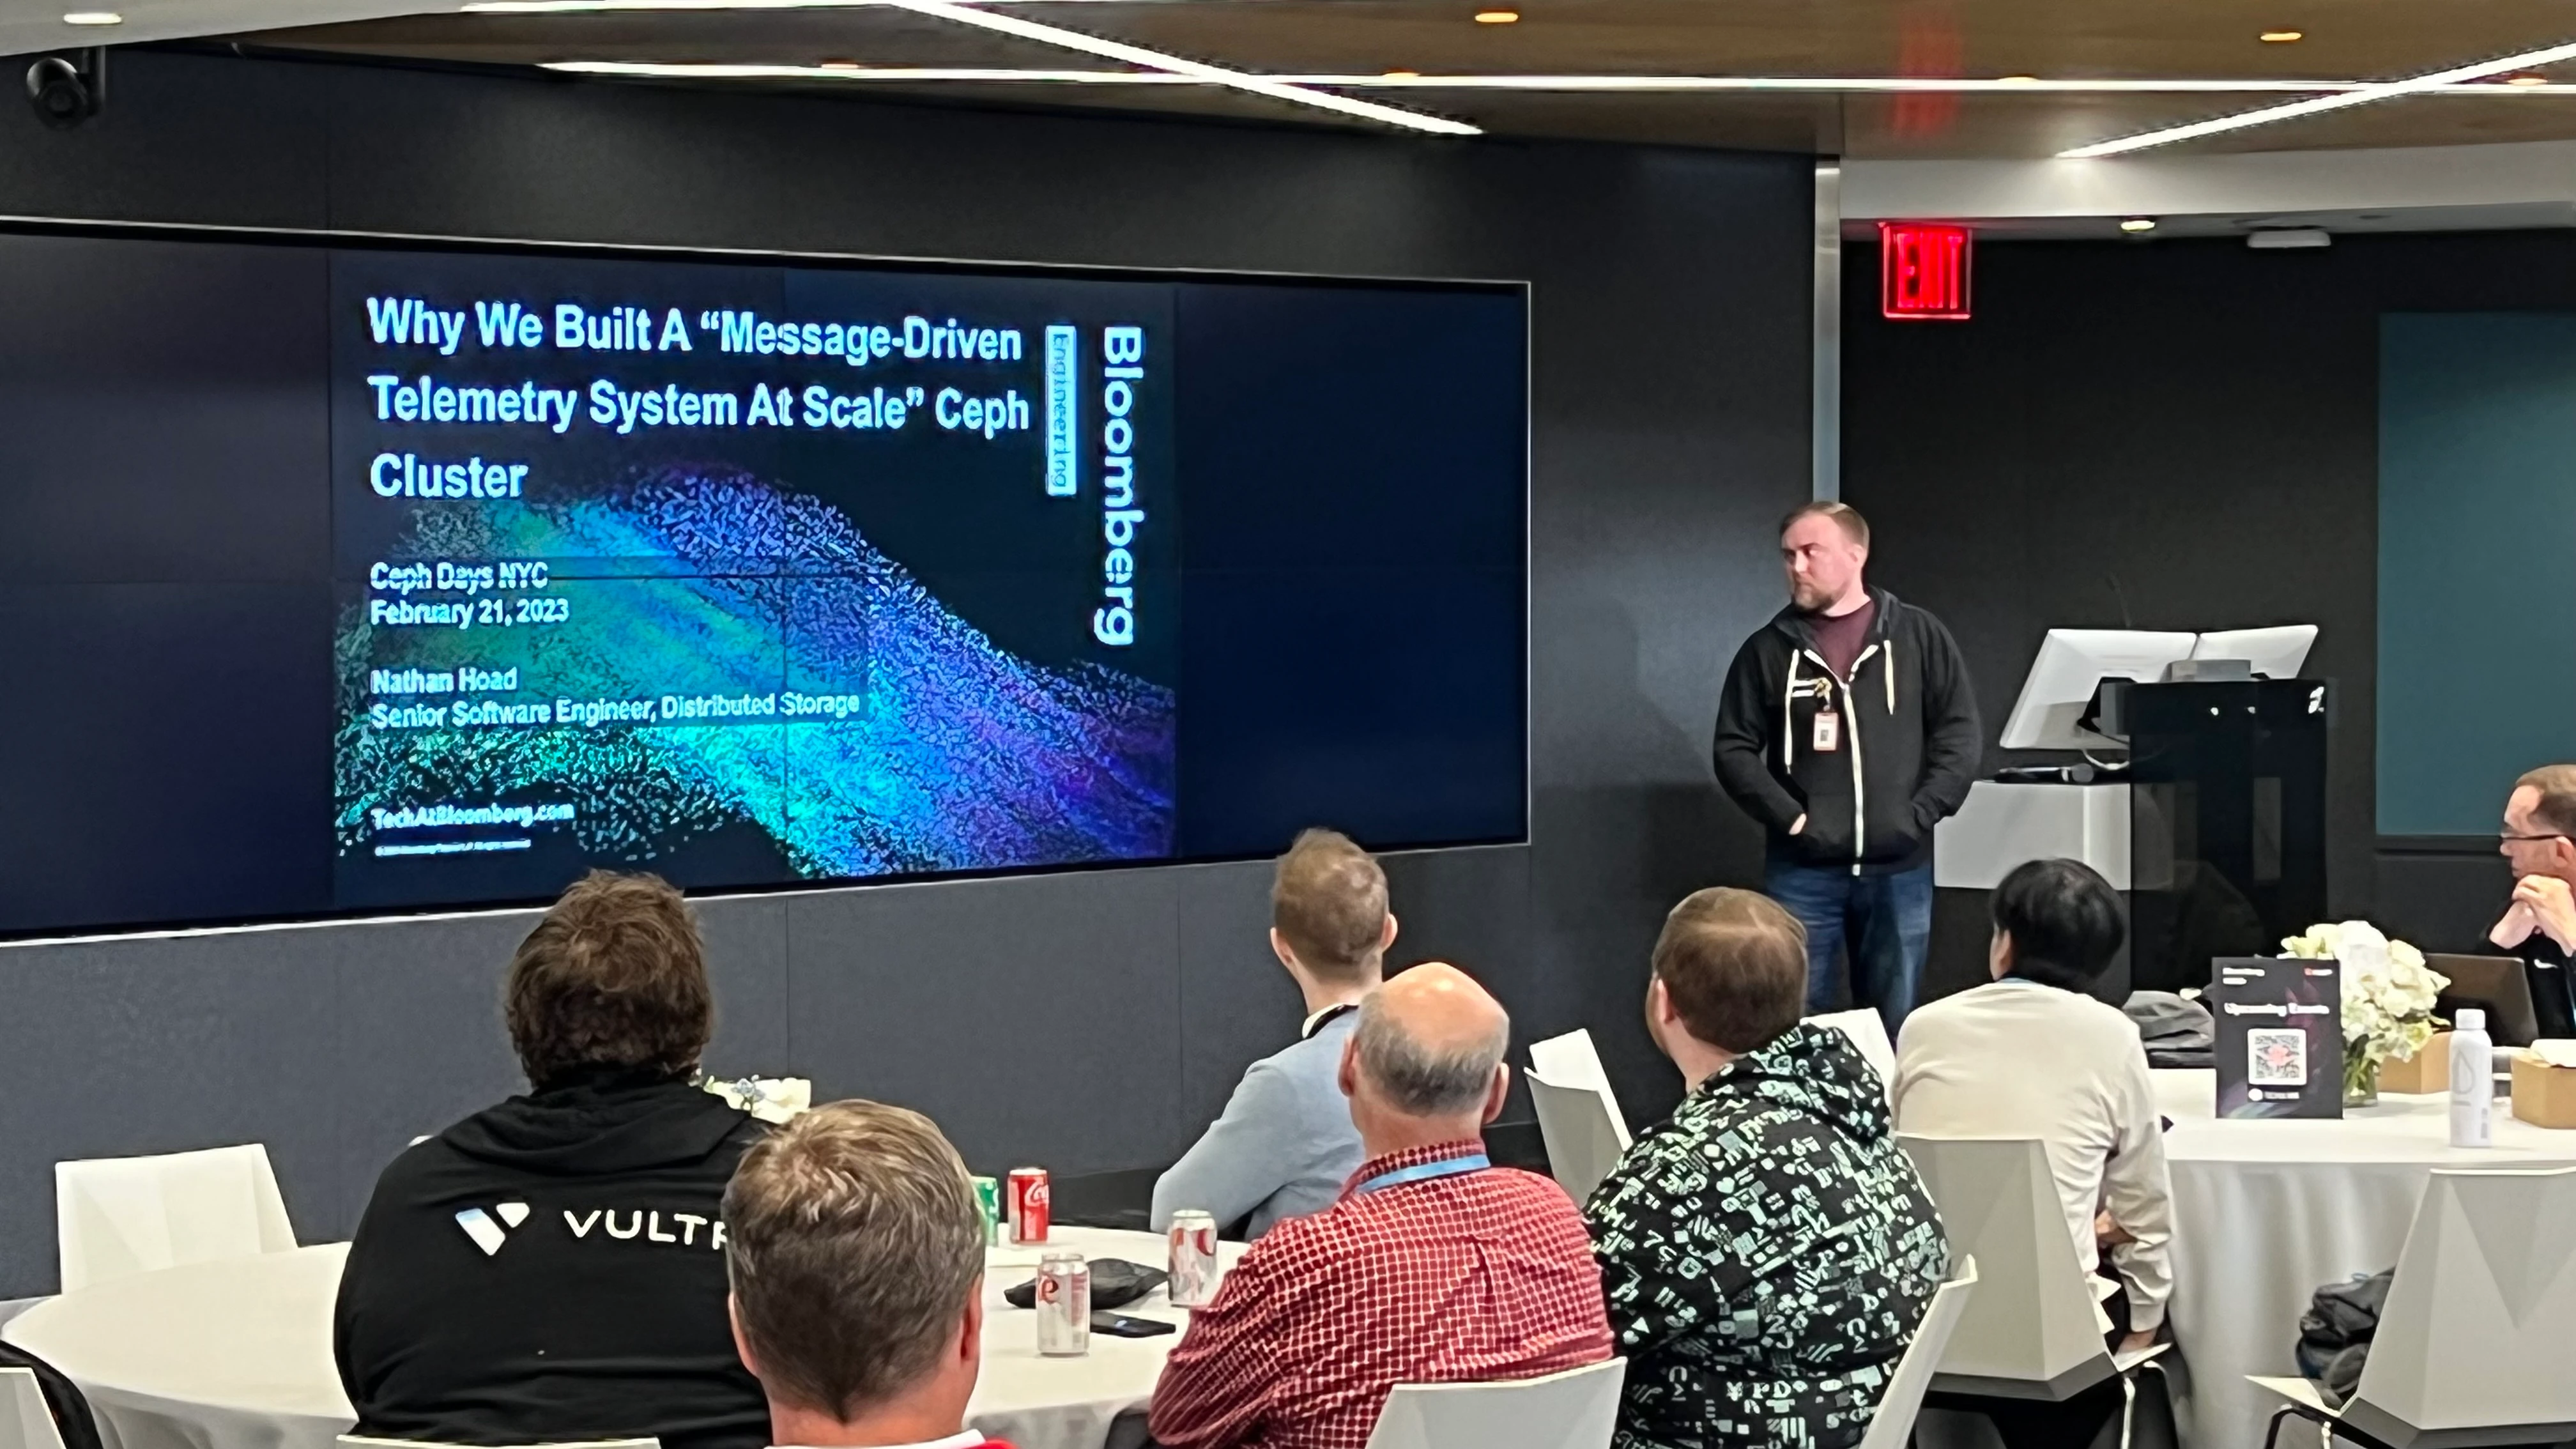 Senior Software Engineer Nathan Hoad of Bloomberg's Storage Engineering team talking about why Bloomberg built a “Message-Driven Telemetry System At Scale” for our Ceph clusters during Ceph Days NYC, hosted at Bloomberg's Park Avenue office